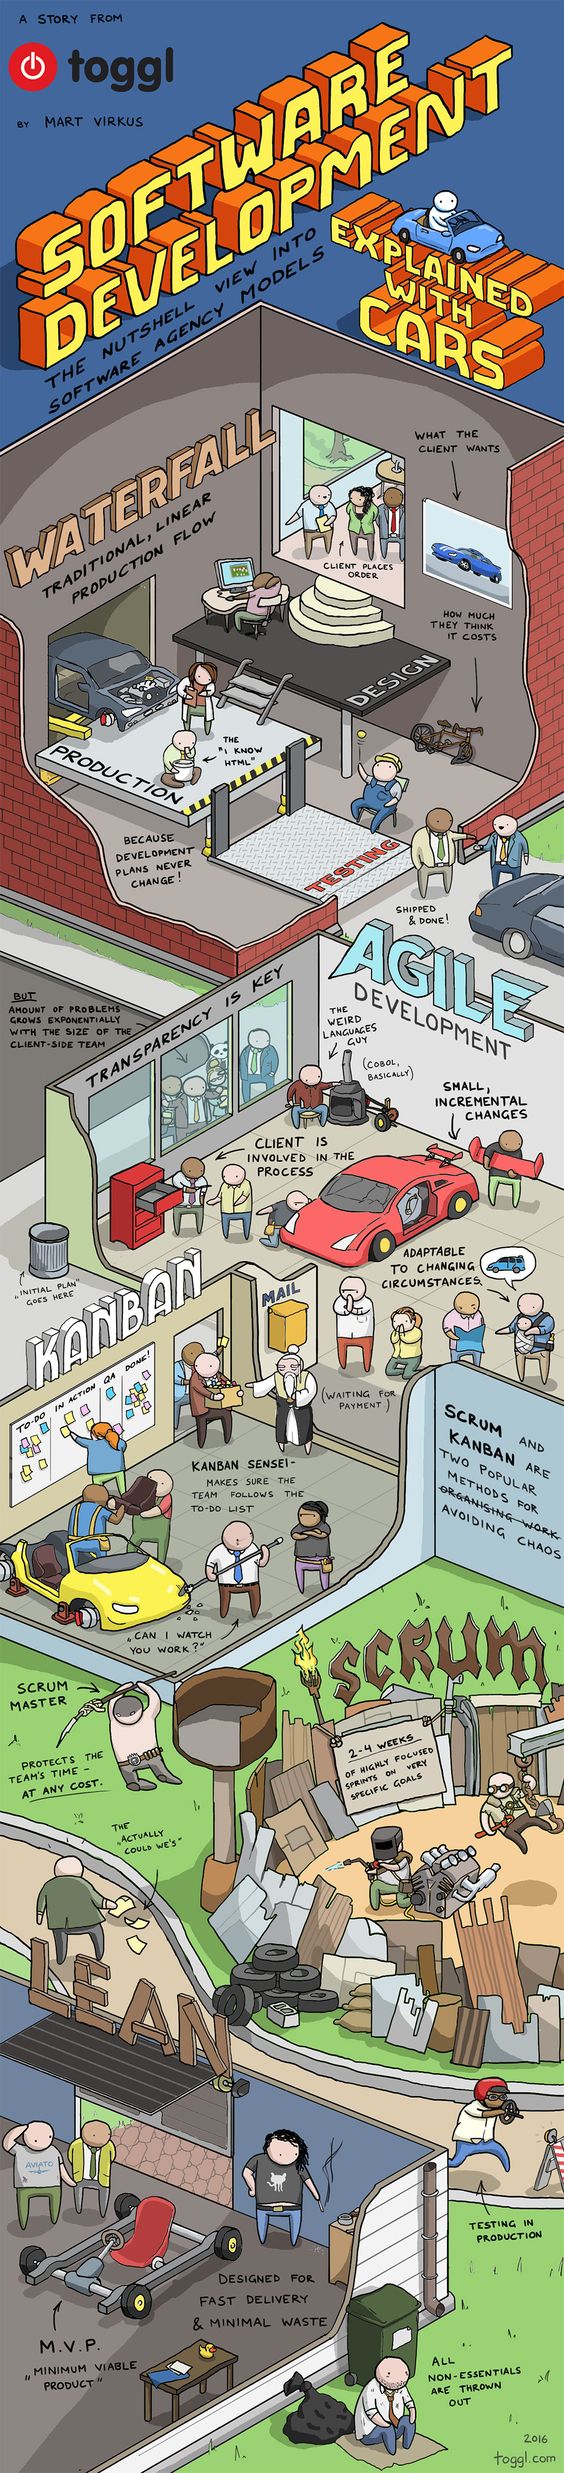 Software Development Explained With Cars - #infographic